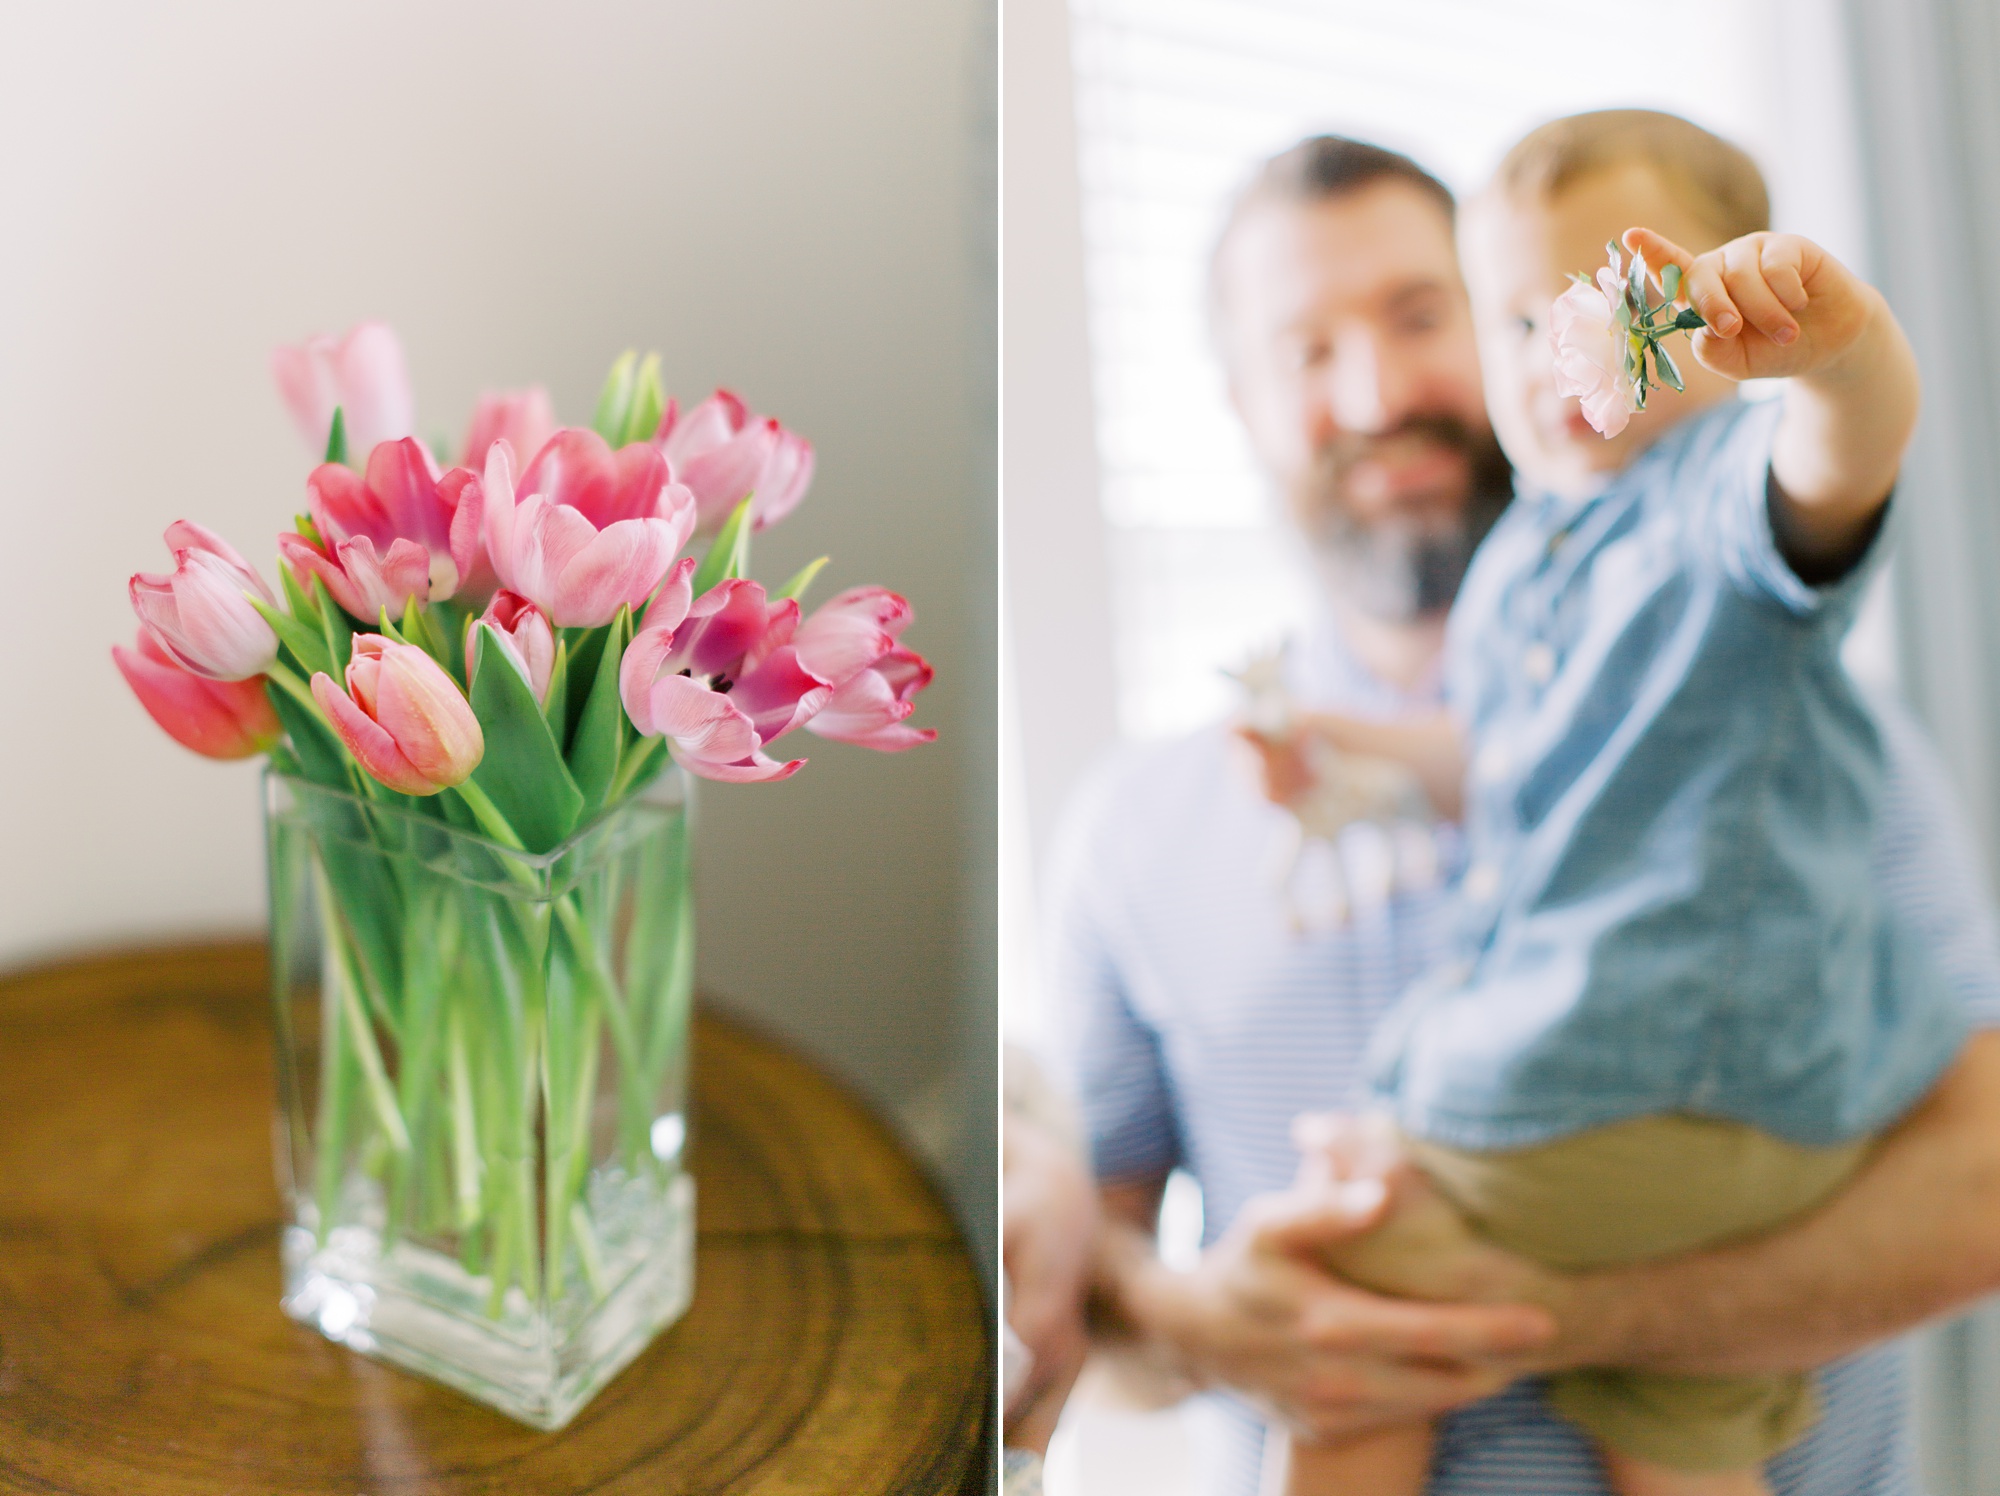 dad and son play with fresh flowers during lifestyle photos at home